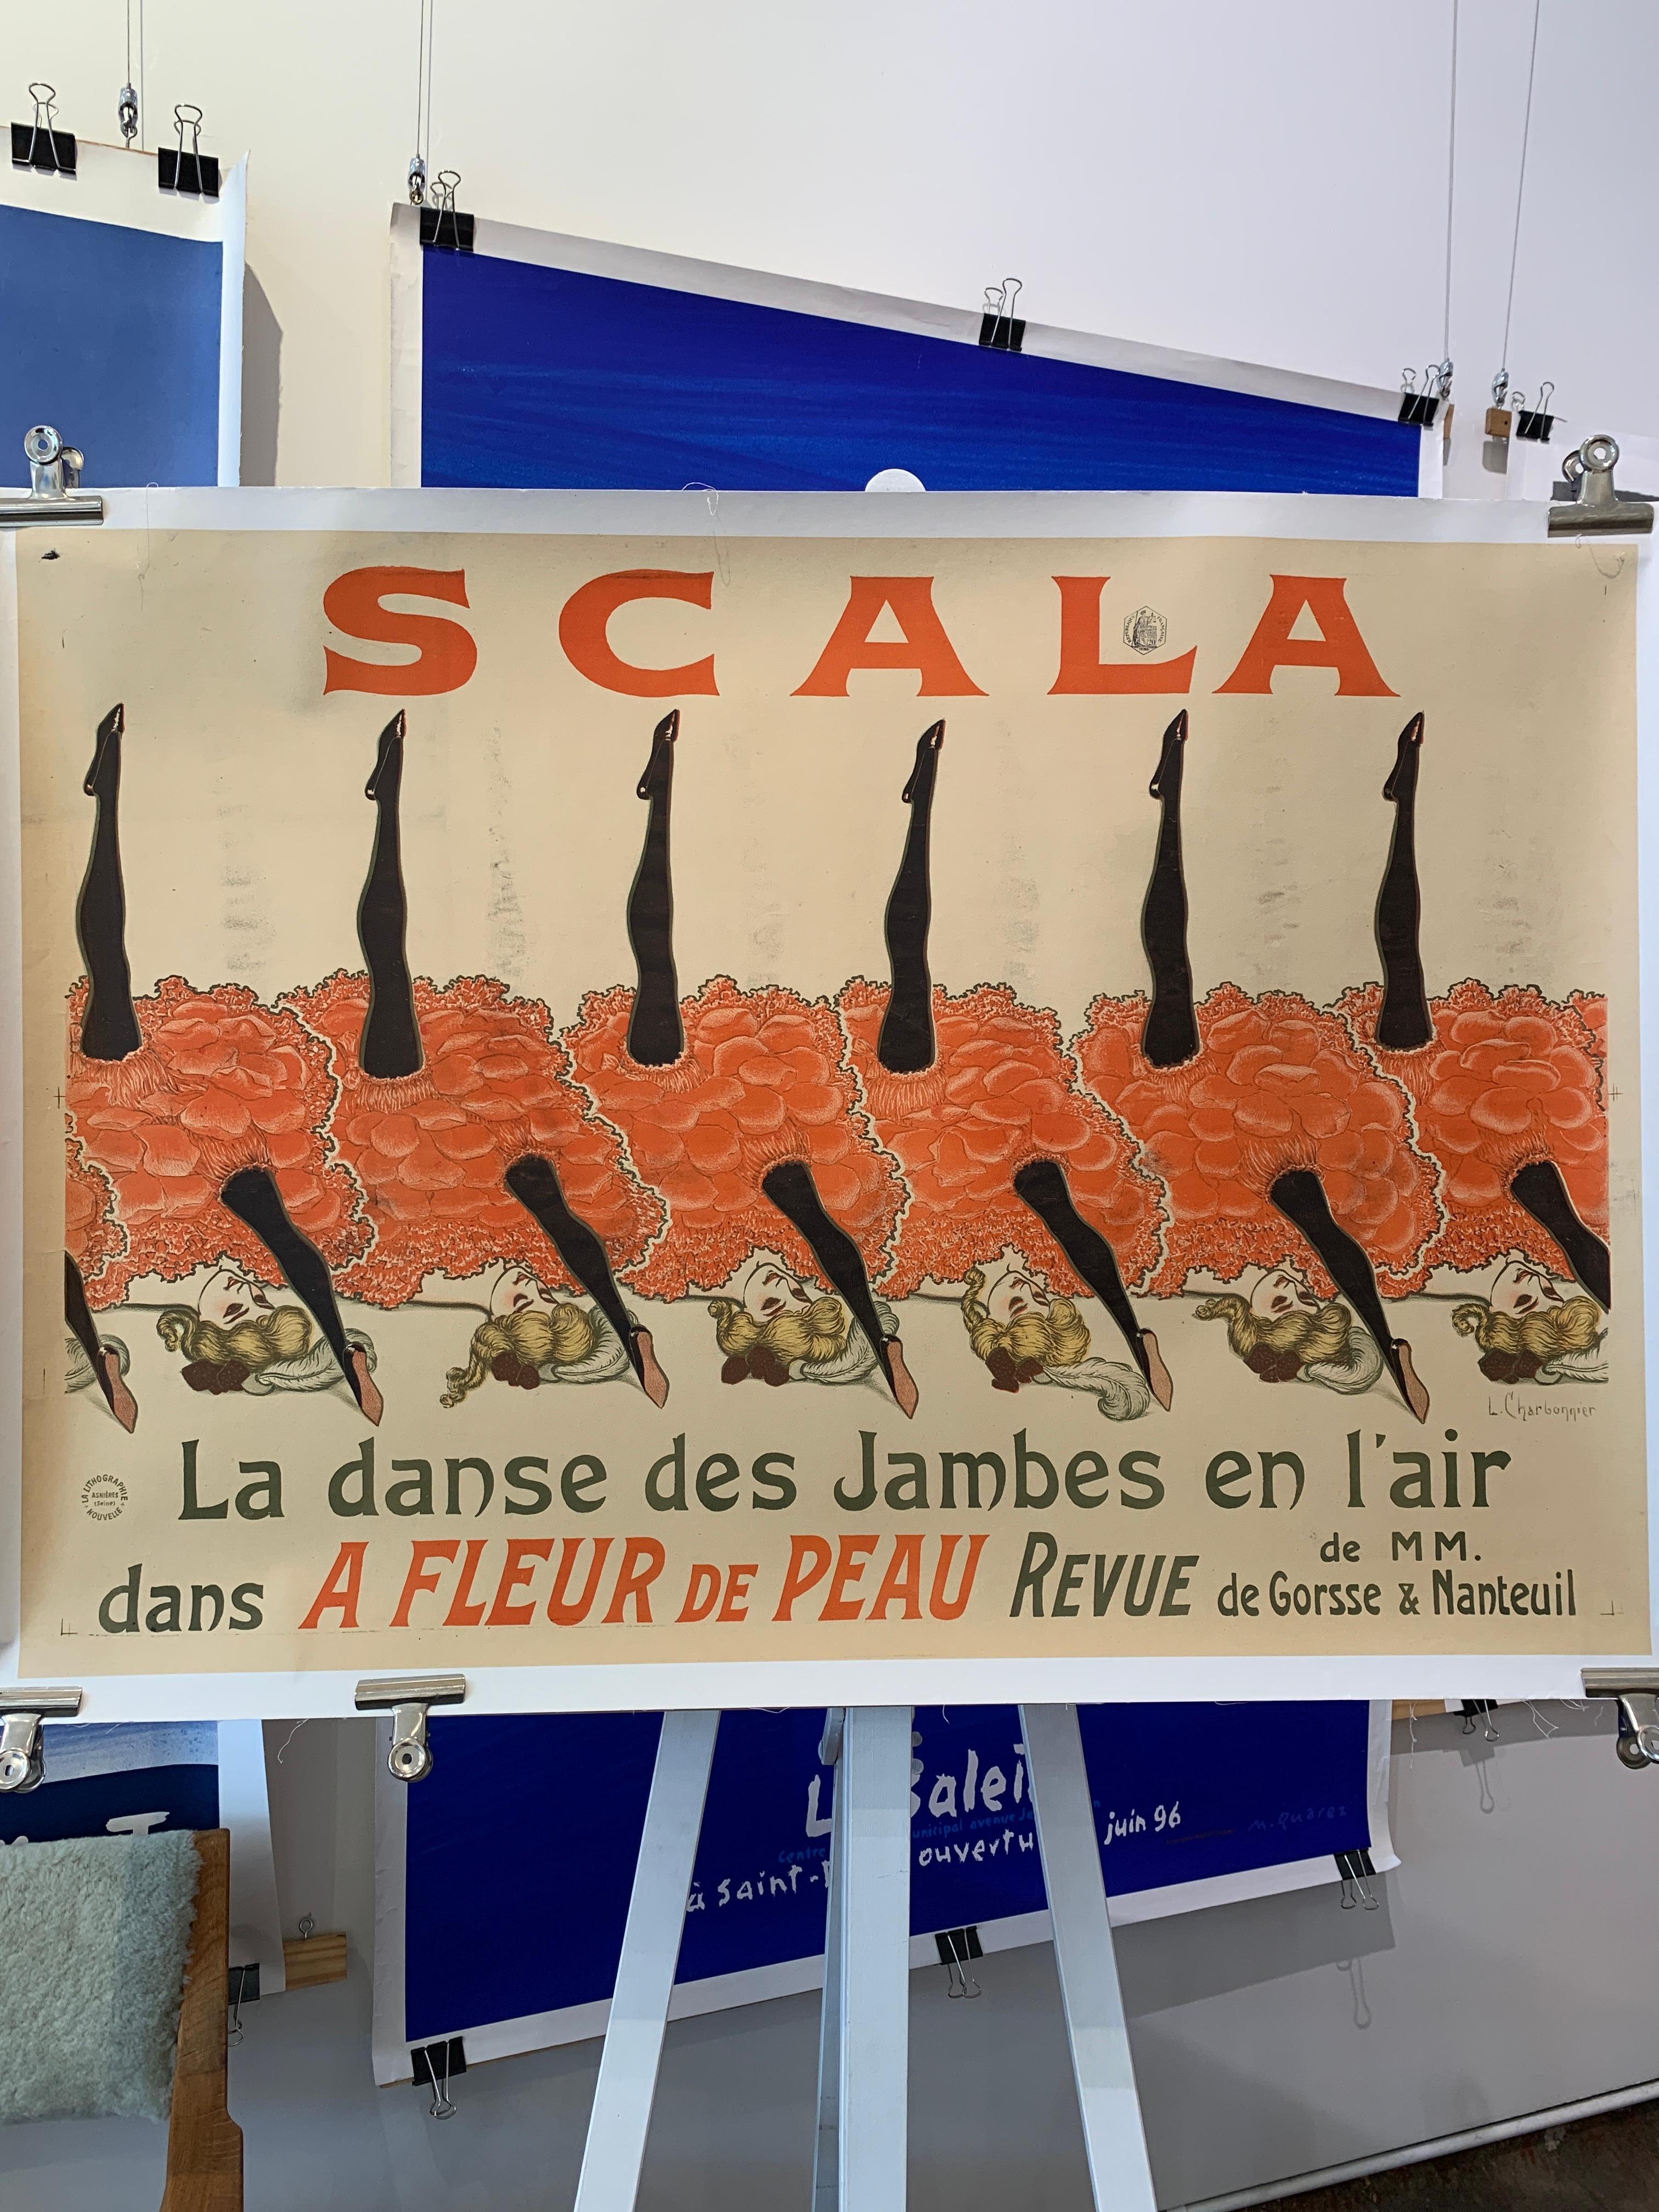 Linen 'SCALA', Original Vintage Early 19th Century Ballet Theatre Poster For Sale